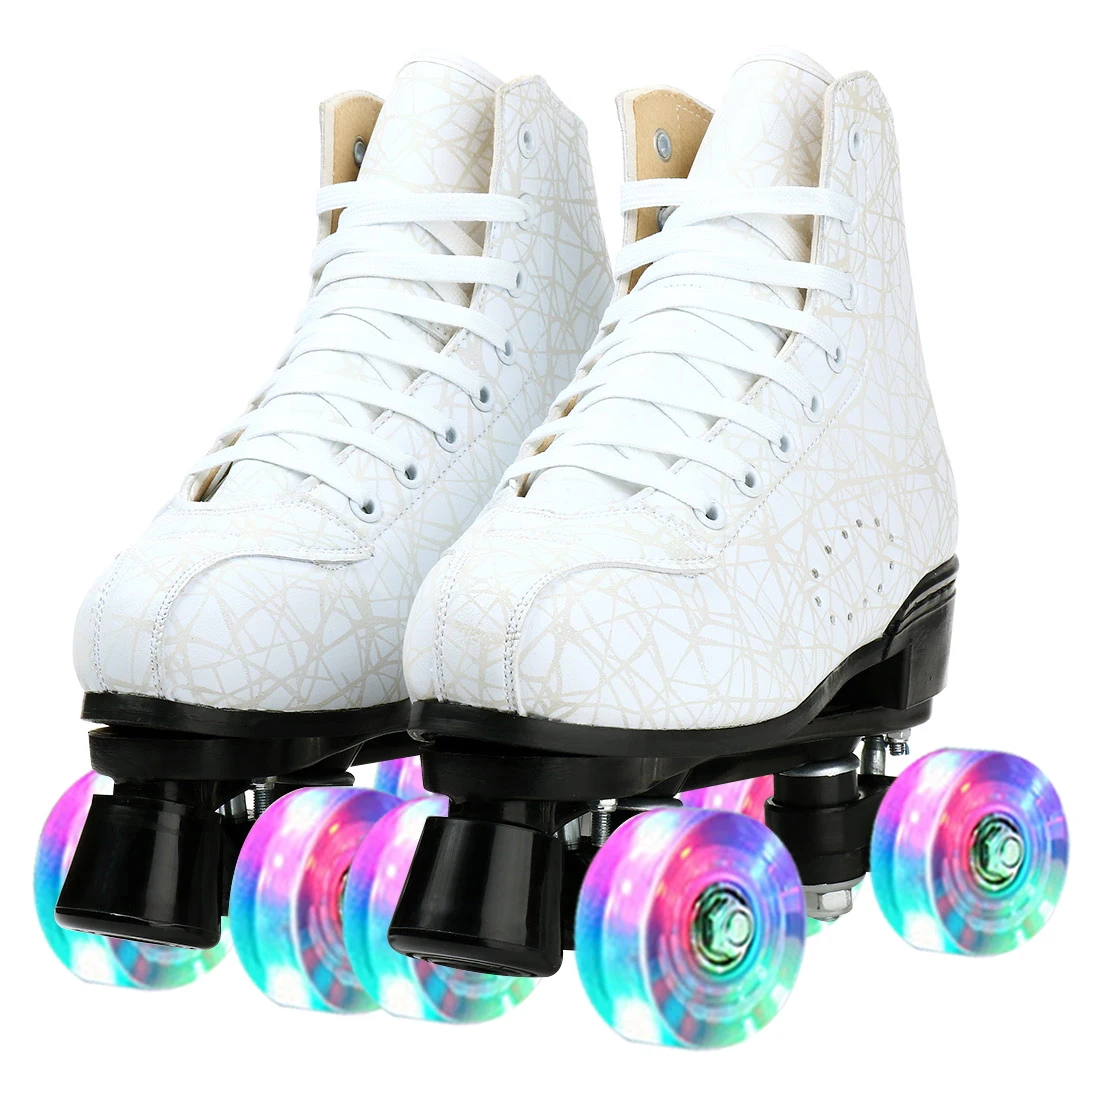 Skating Shoes Pu Leather Flash Roller Skates  Double Line Skates on 4 Glowing Wheels  Kids Boys  Girls Outdoor  Sliding Sneakers